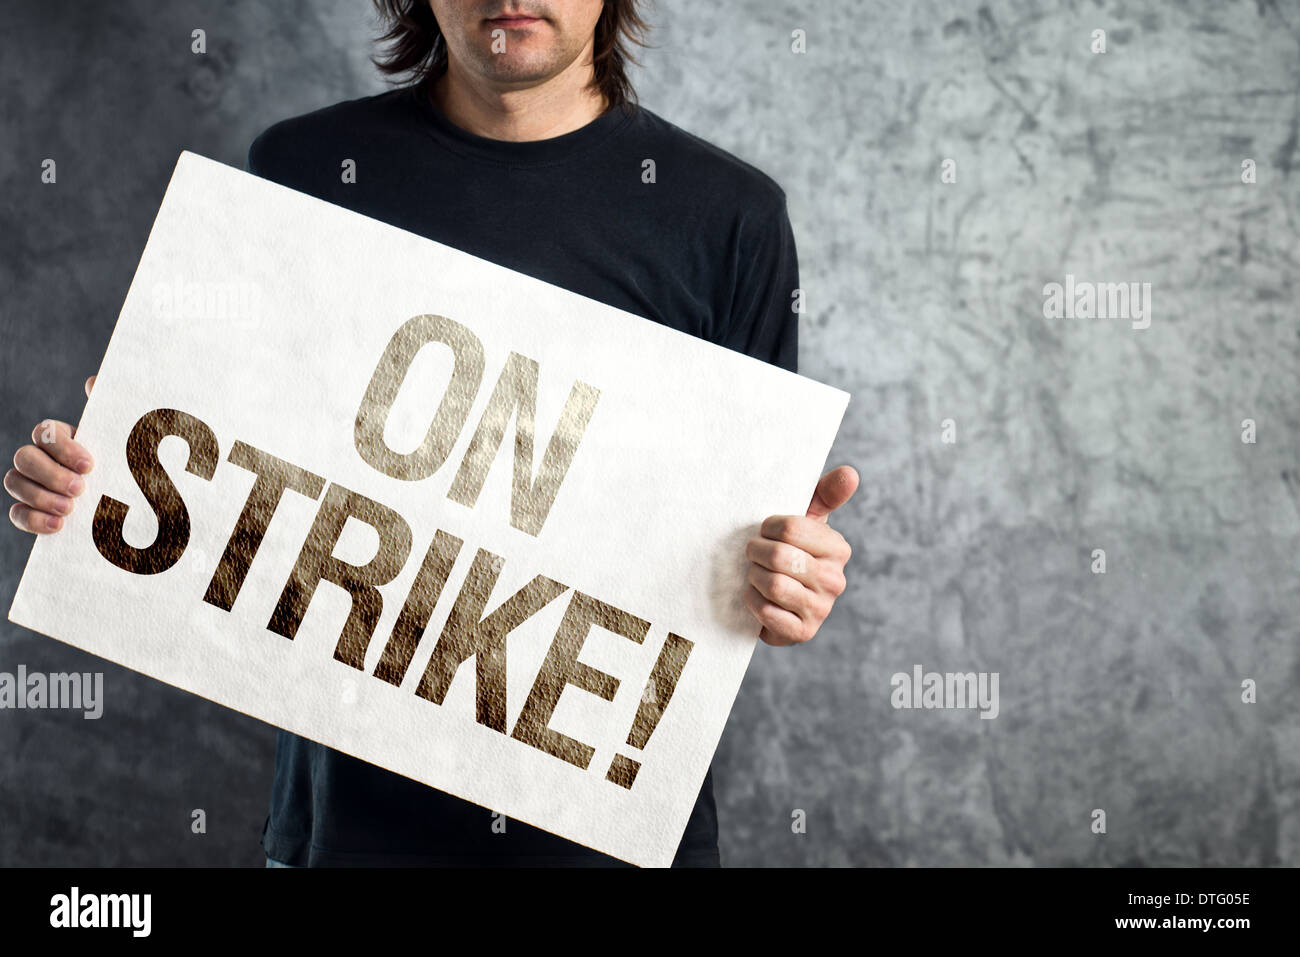 Man holding banner with ON STRIKE printed protest message. Stock Photo